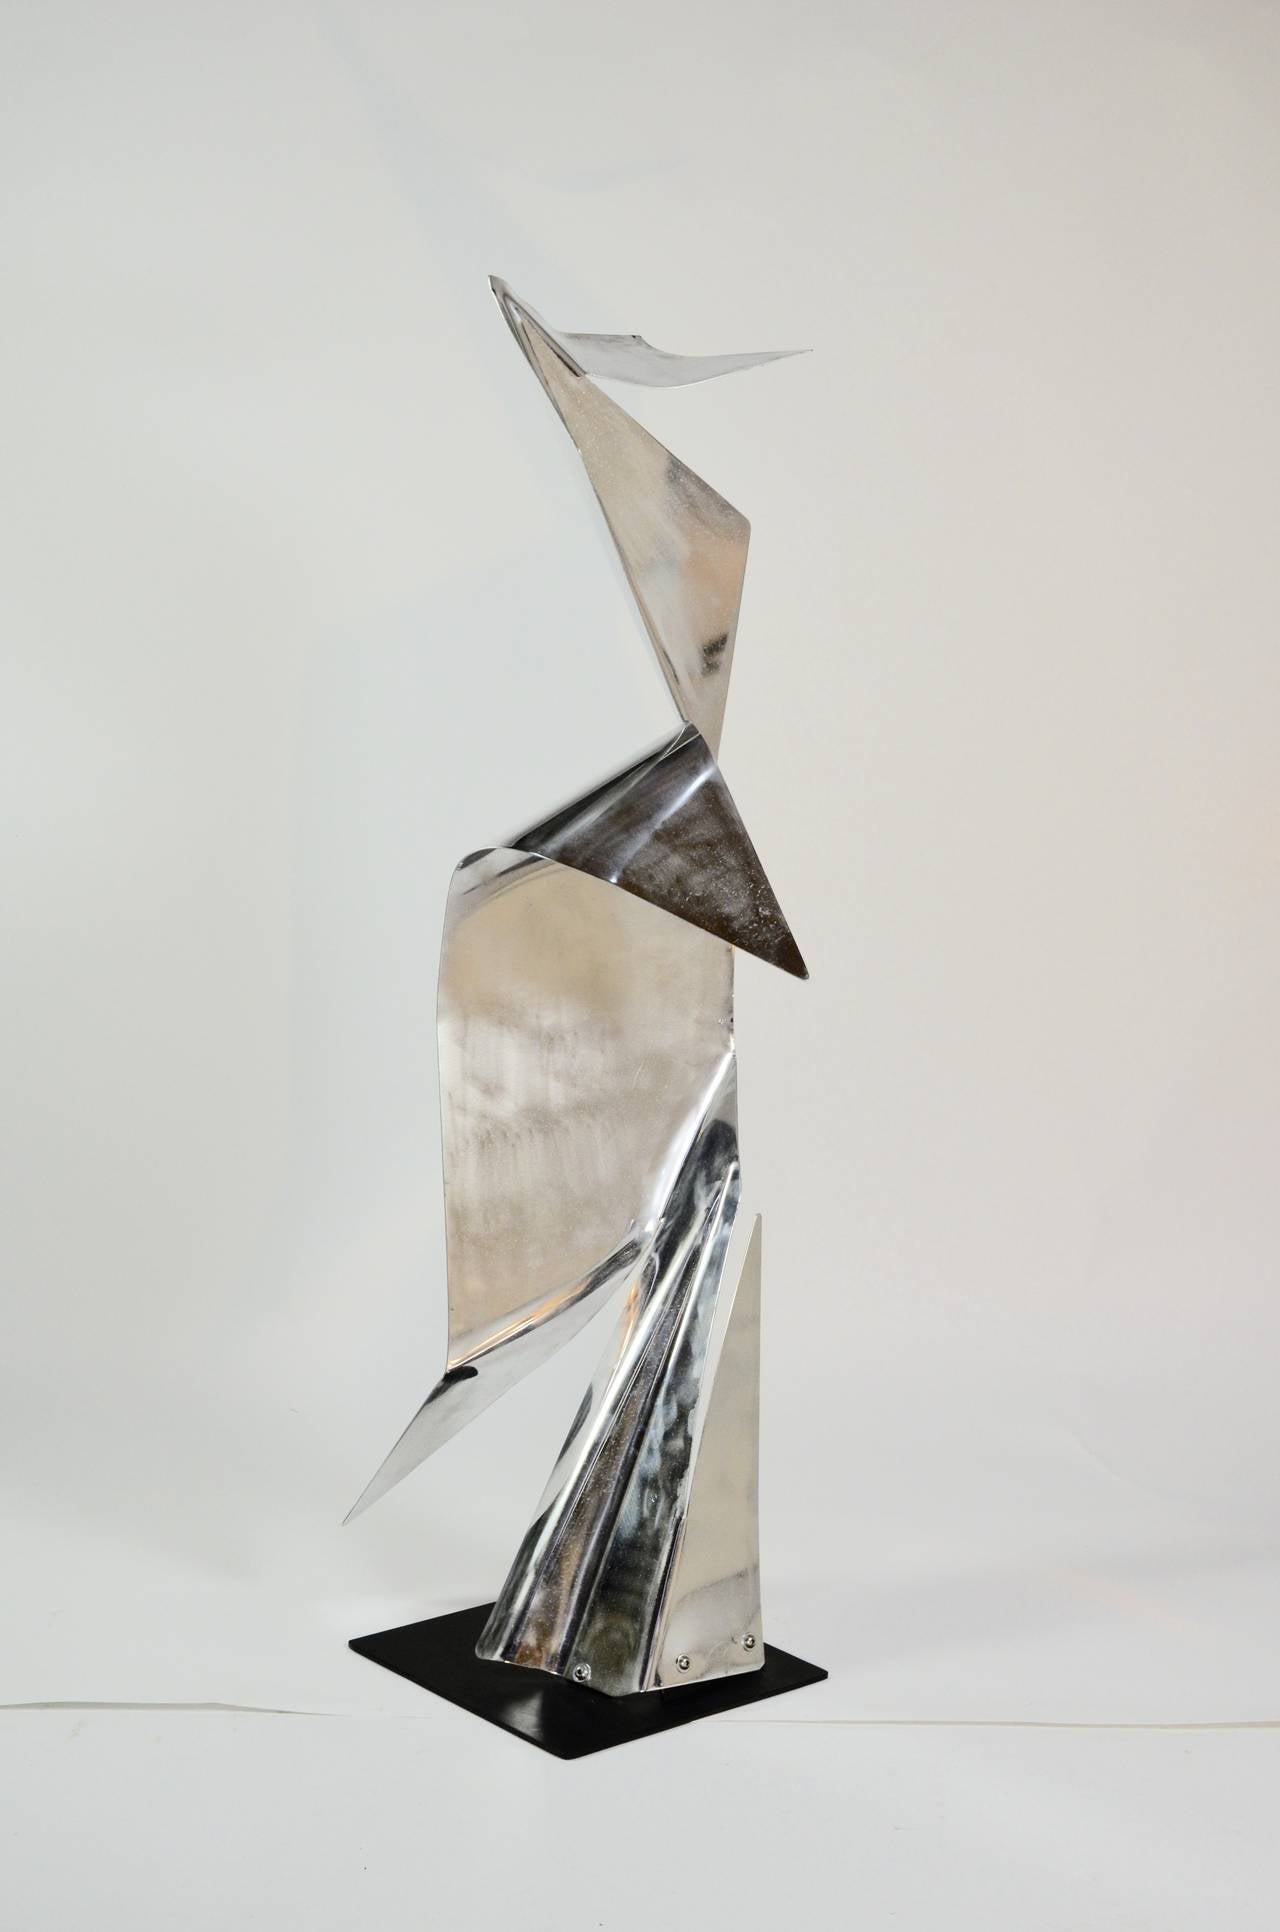 Lifesize sculpture rendered in artfully folded,
aluminium. This piece is by local bay area artist, John Chase Lewis 1924-2013. Mr. Lewis enjoyed a long industrious career spanning decades. He was a student of sculpture and later a teacher,